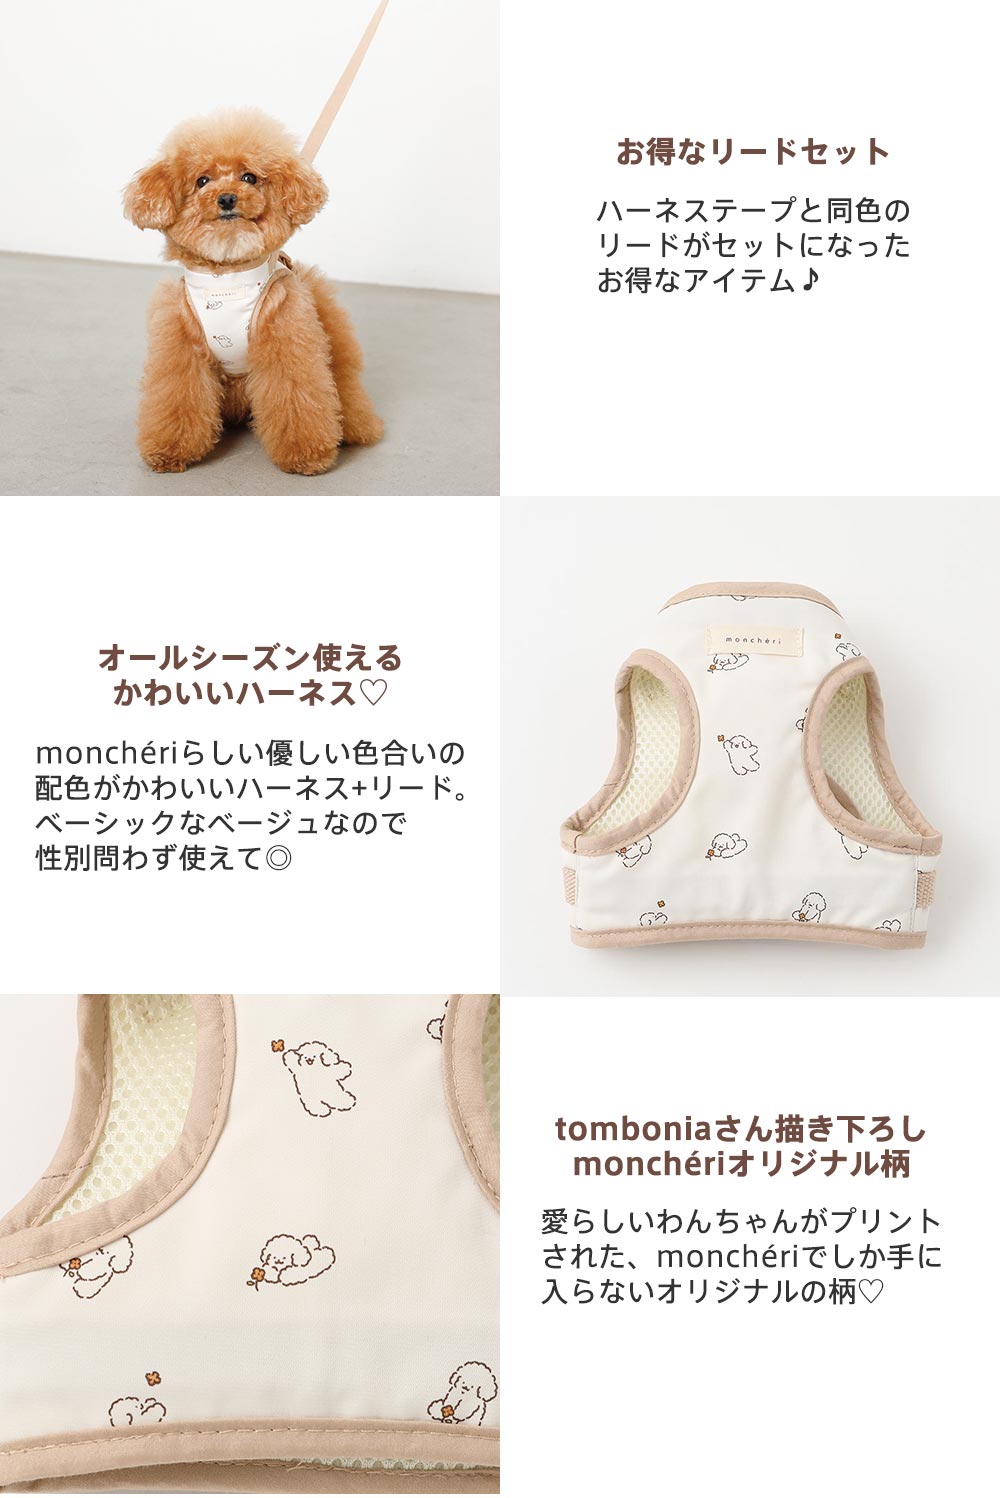 TOMBONIA/Tombonia/Collaboration/Harness/Name Embroidery/Small Dog/Poodle/Chihuahua/Point 1